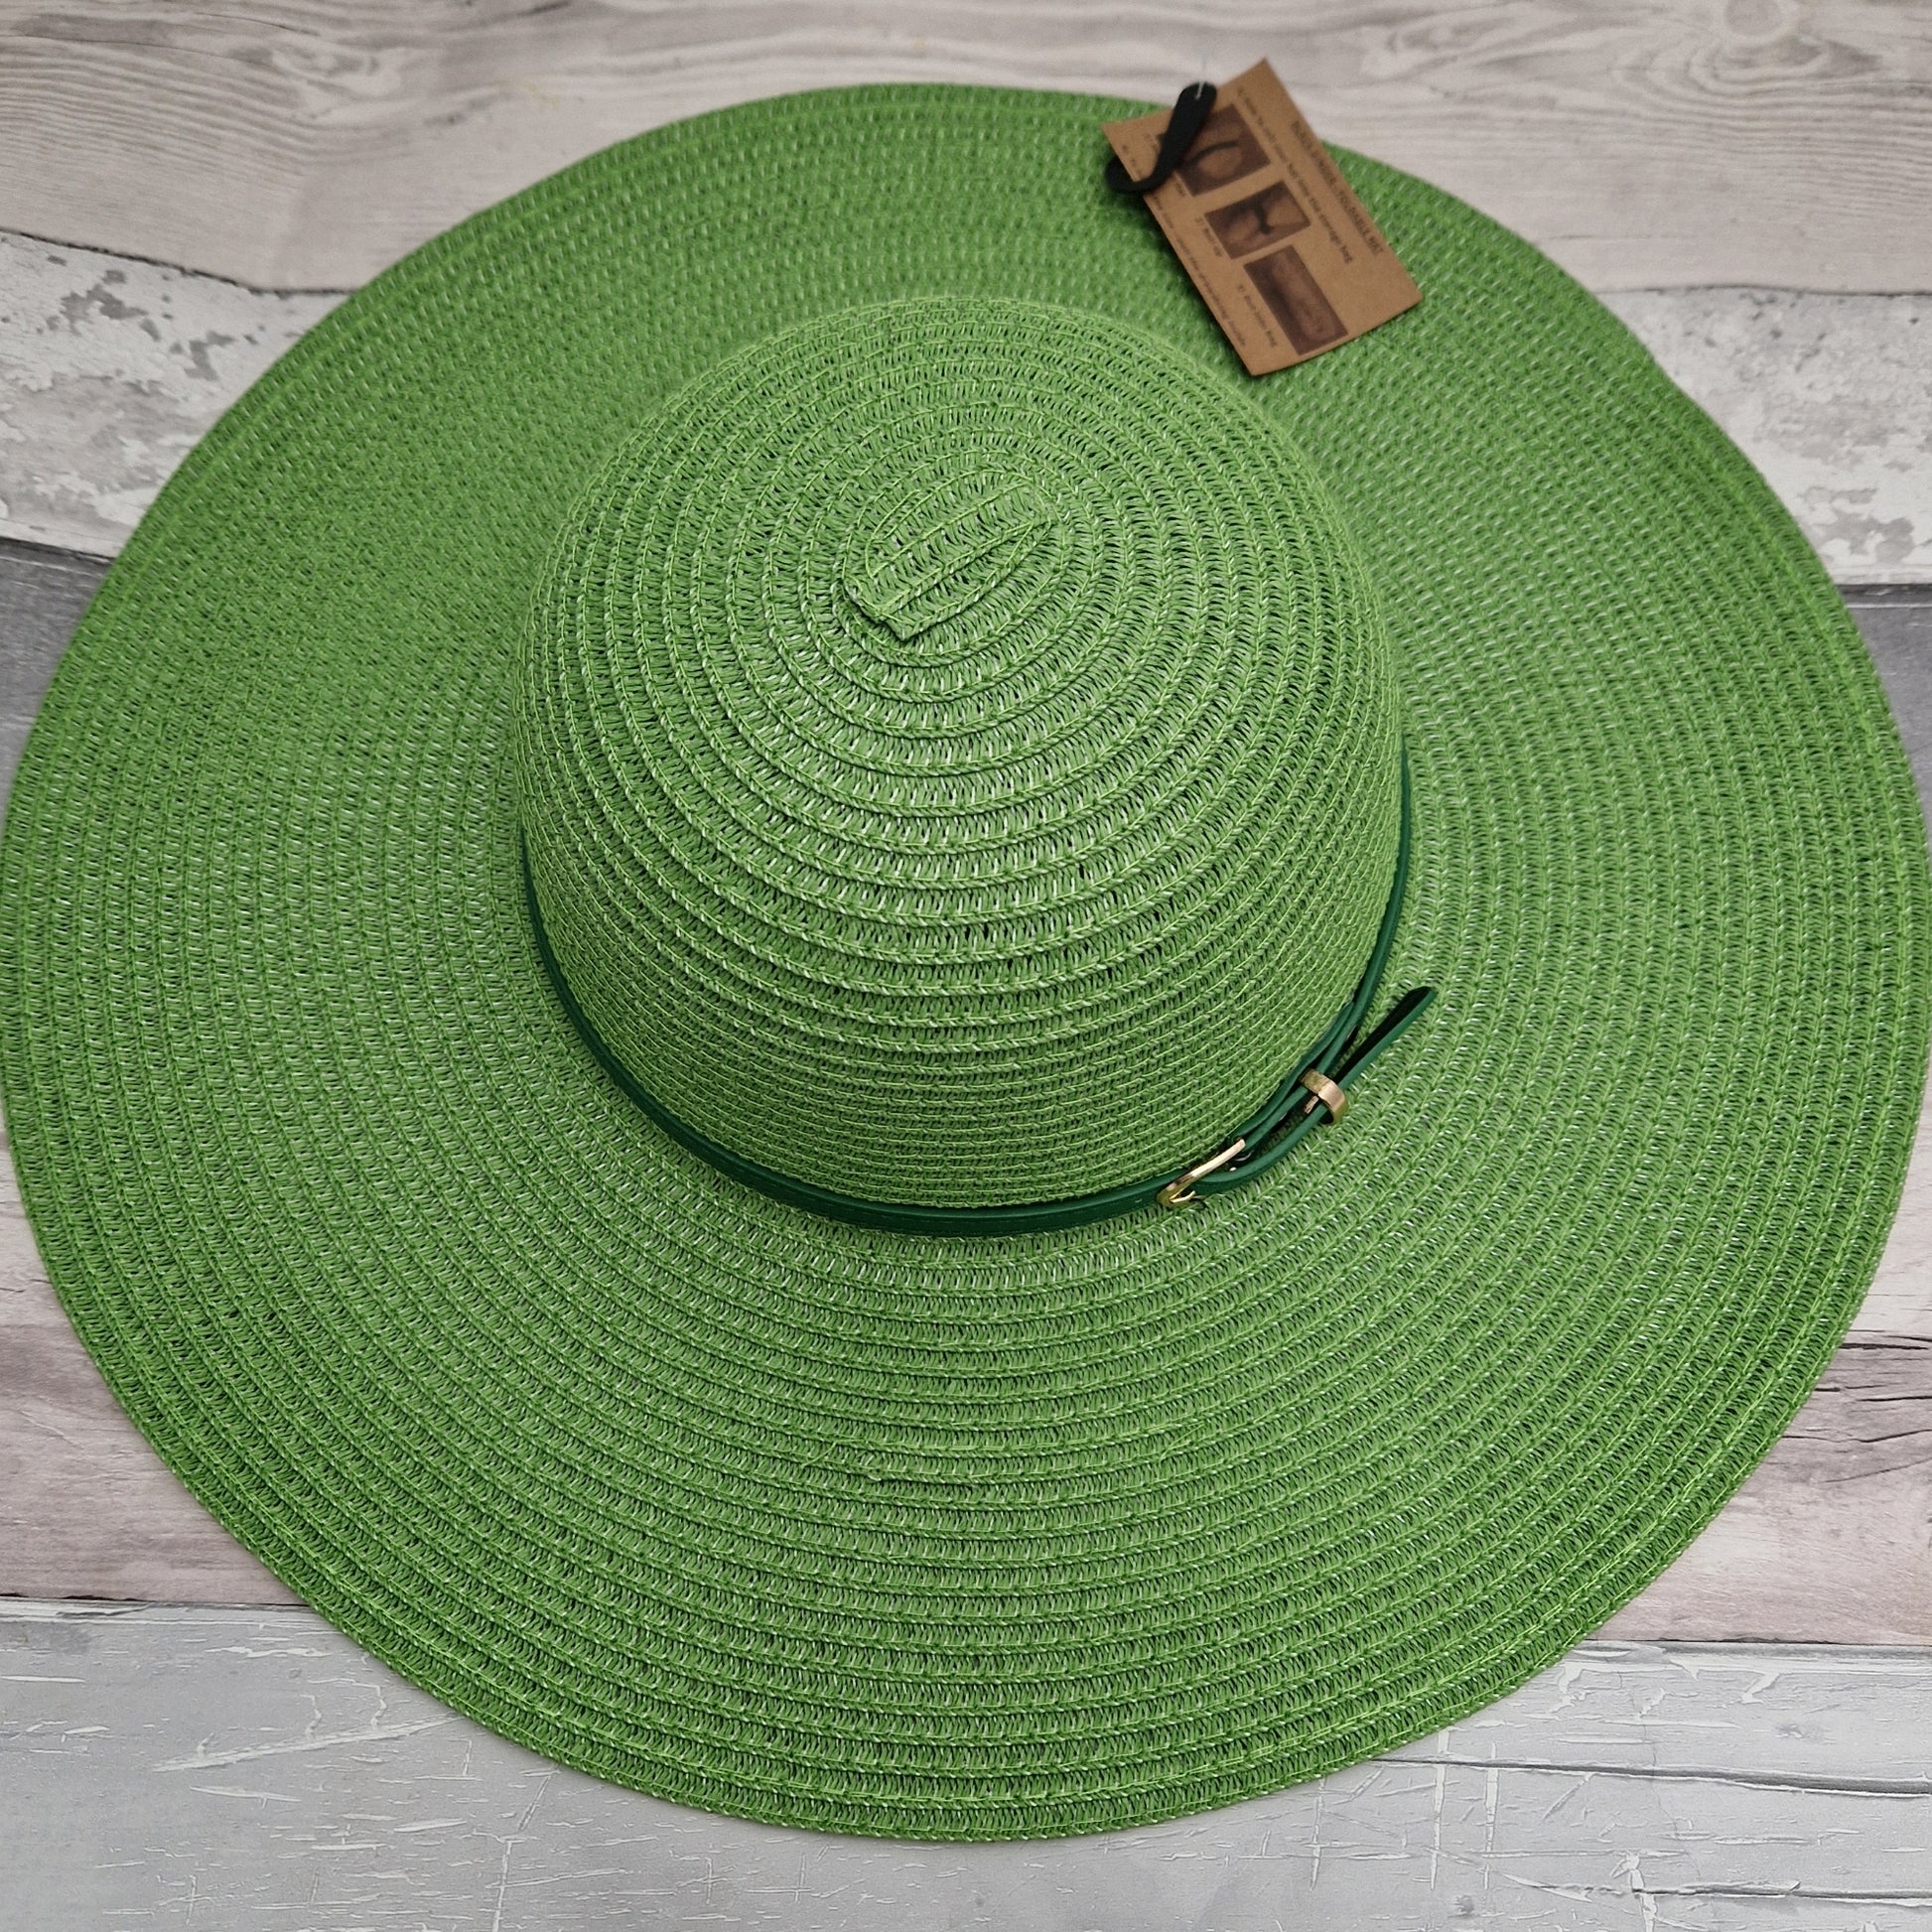 Wide brimmed emerald green hat with matching belted band.